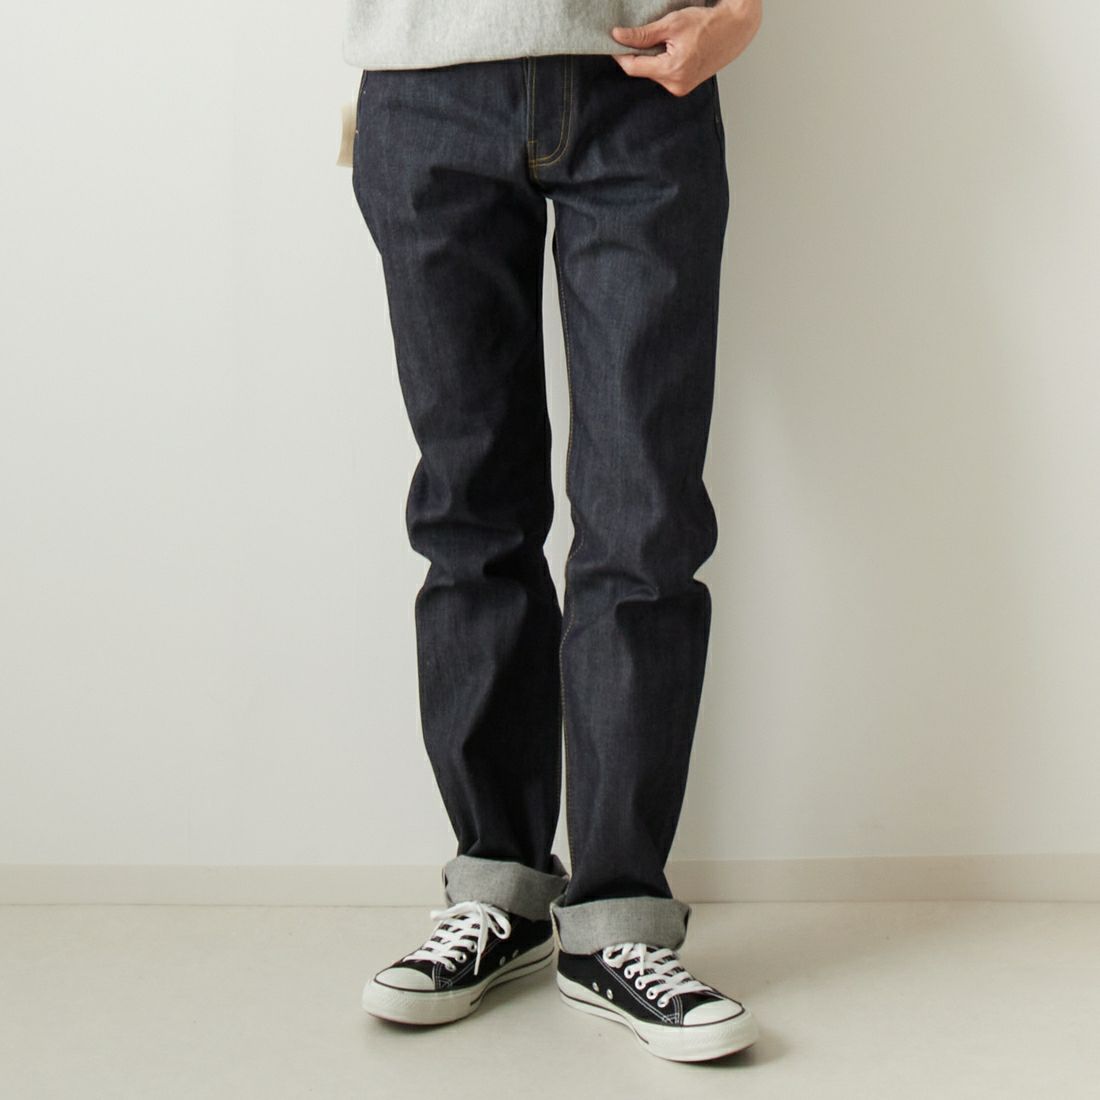 LEVIS Vintage Clothing [リーバイス ヴィンテージ クロージング] 1944モデル 501 [44501-00]